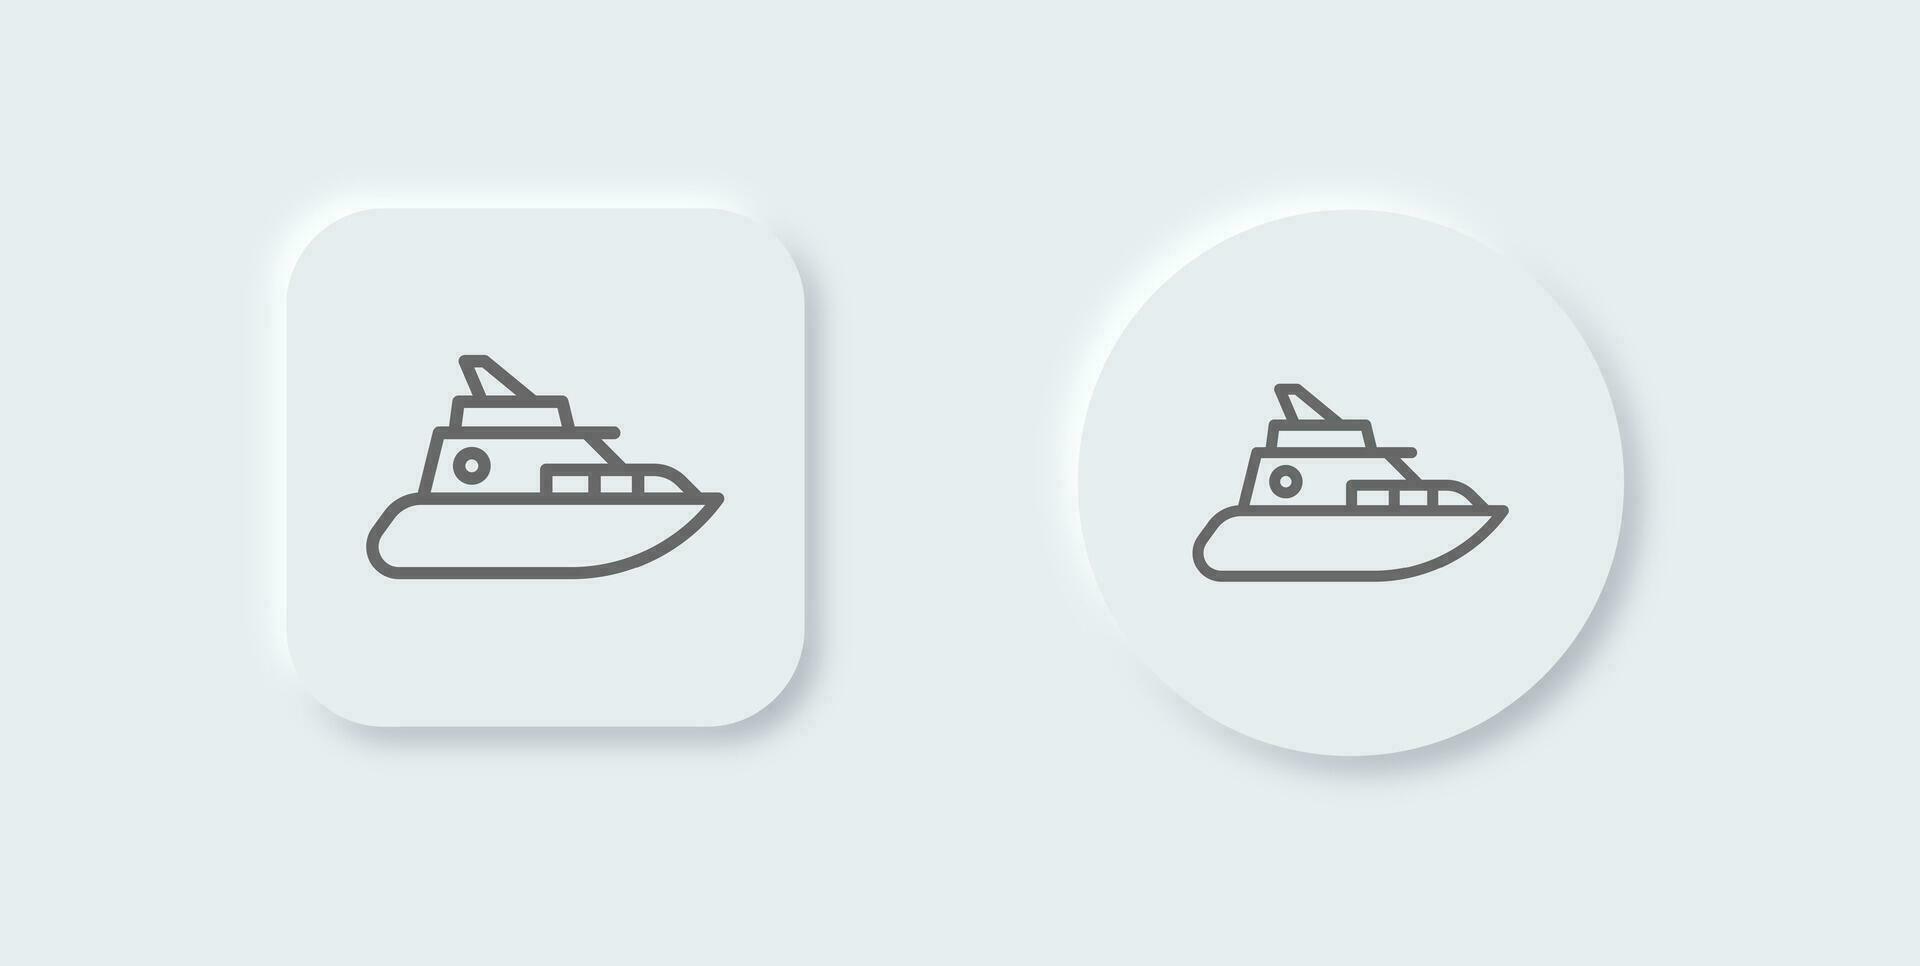 Yacht line icon in neomorphic design style. Ship signs vector illustration.